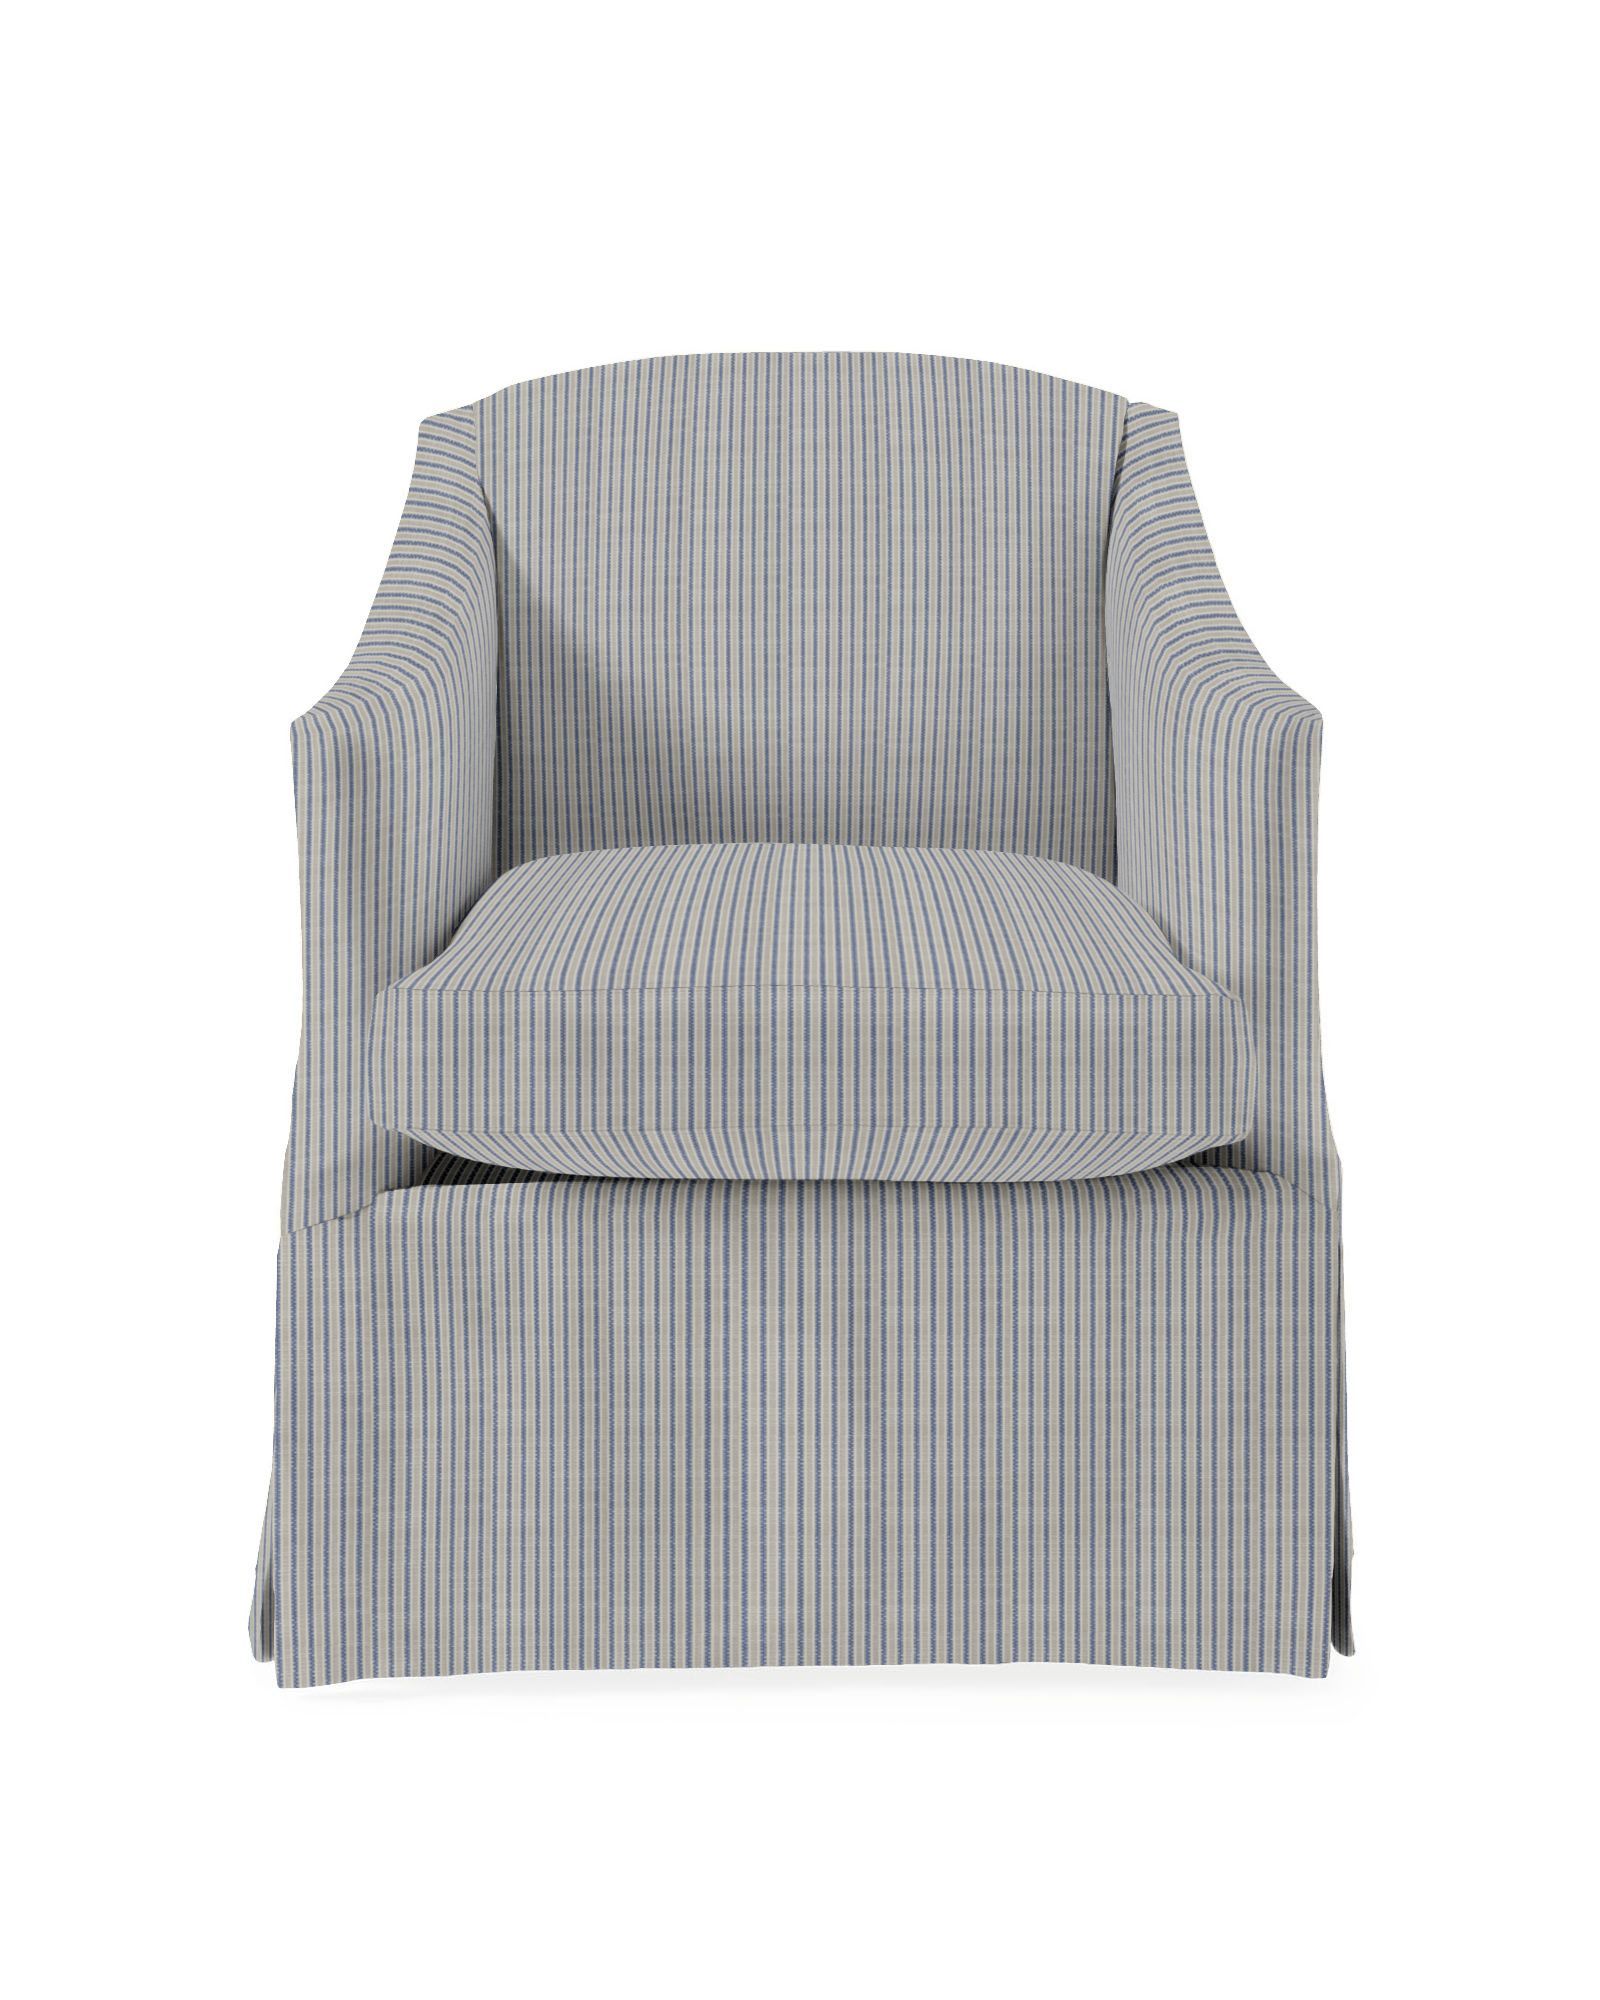 Hinsdale Swivel Chair | Serena and Lily